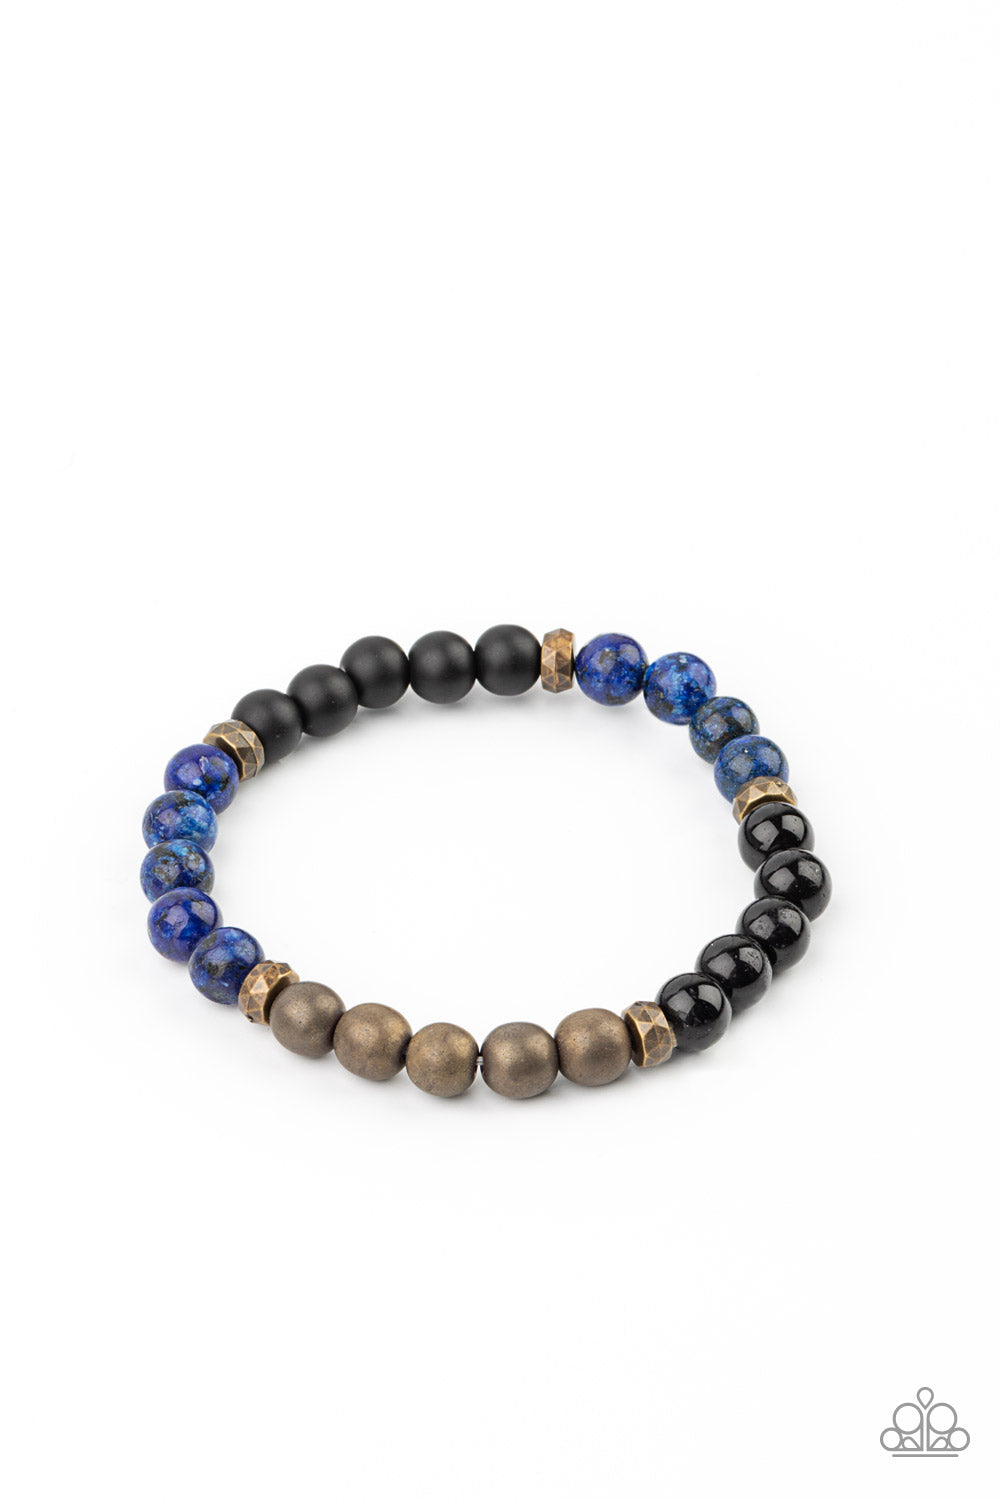 Paparazzi Accessories Petrified Powerhouse - Blue Urban Bracelets a collection of smooth round Lapiz and polished stones, punctuated by faceted antiqued brass beads, are threaded along a stretchy band and wrap around the wrist for an elementally earthy effect.  Sold as one individual bracelet.  Paparazzi Jewelry is lead and nickel free so it's perfect for sensitive skin too!